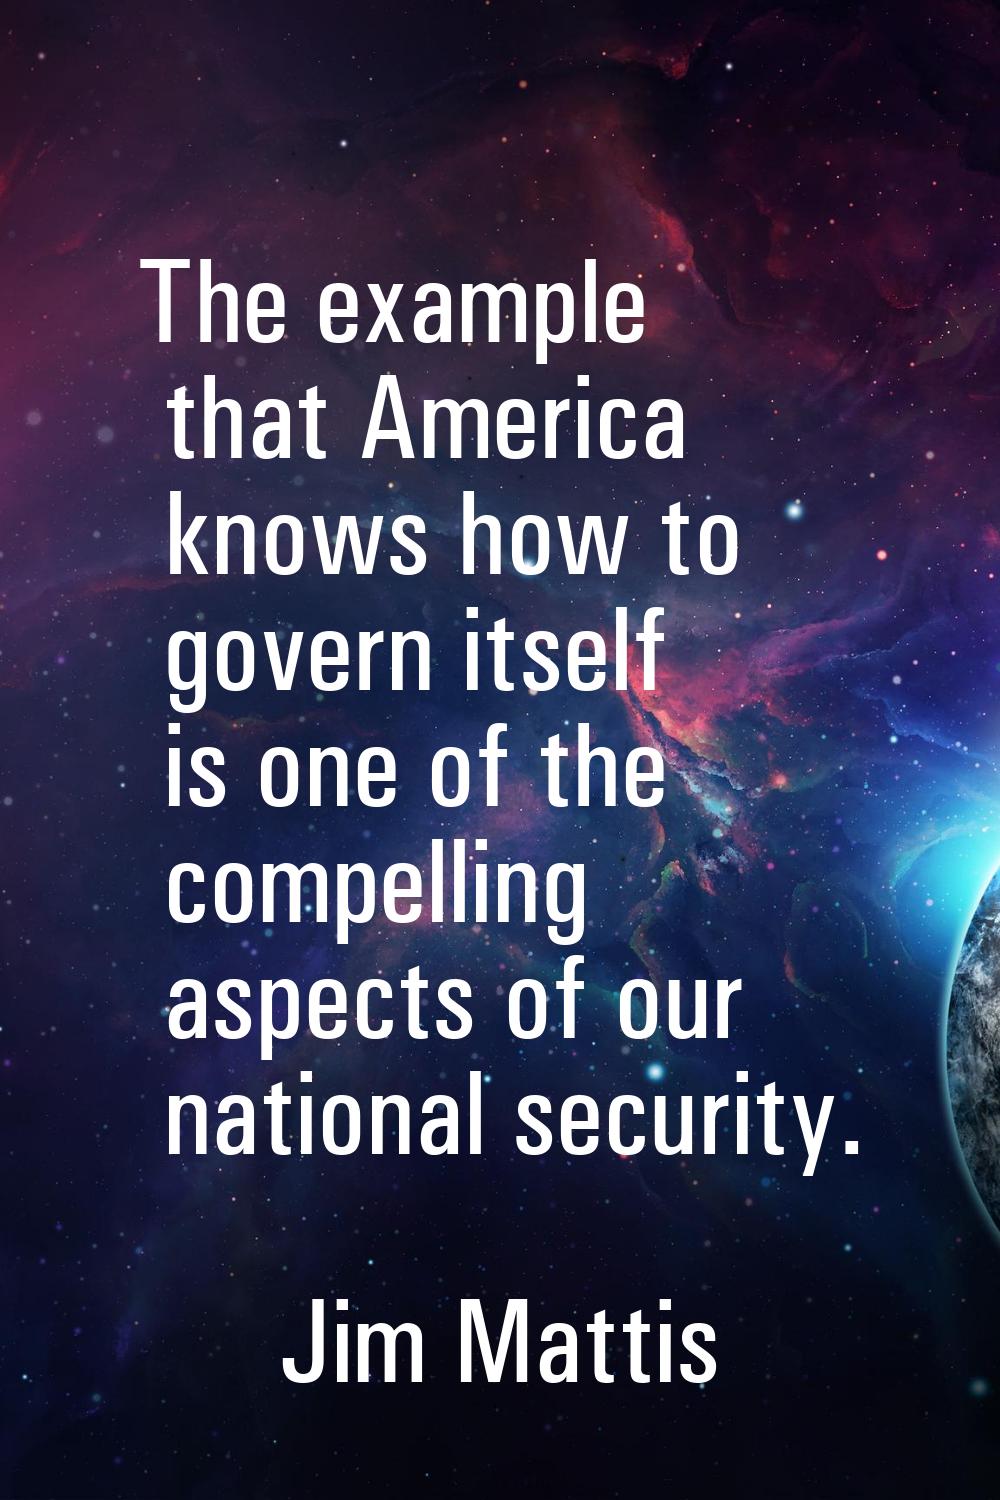 The example that America knows how to govern itself is one of the compelling aspects of our nationa